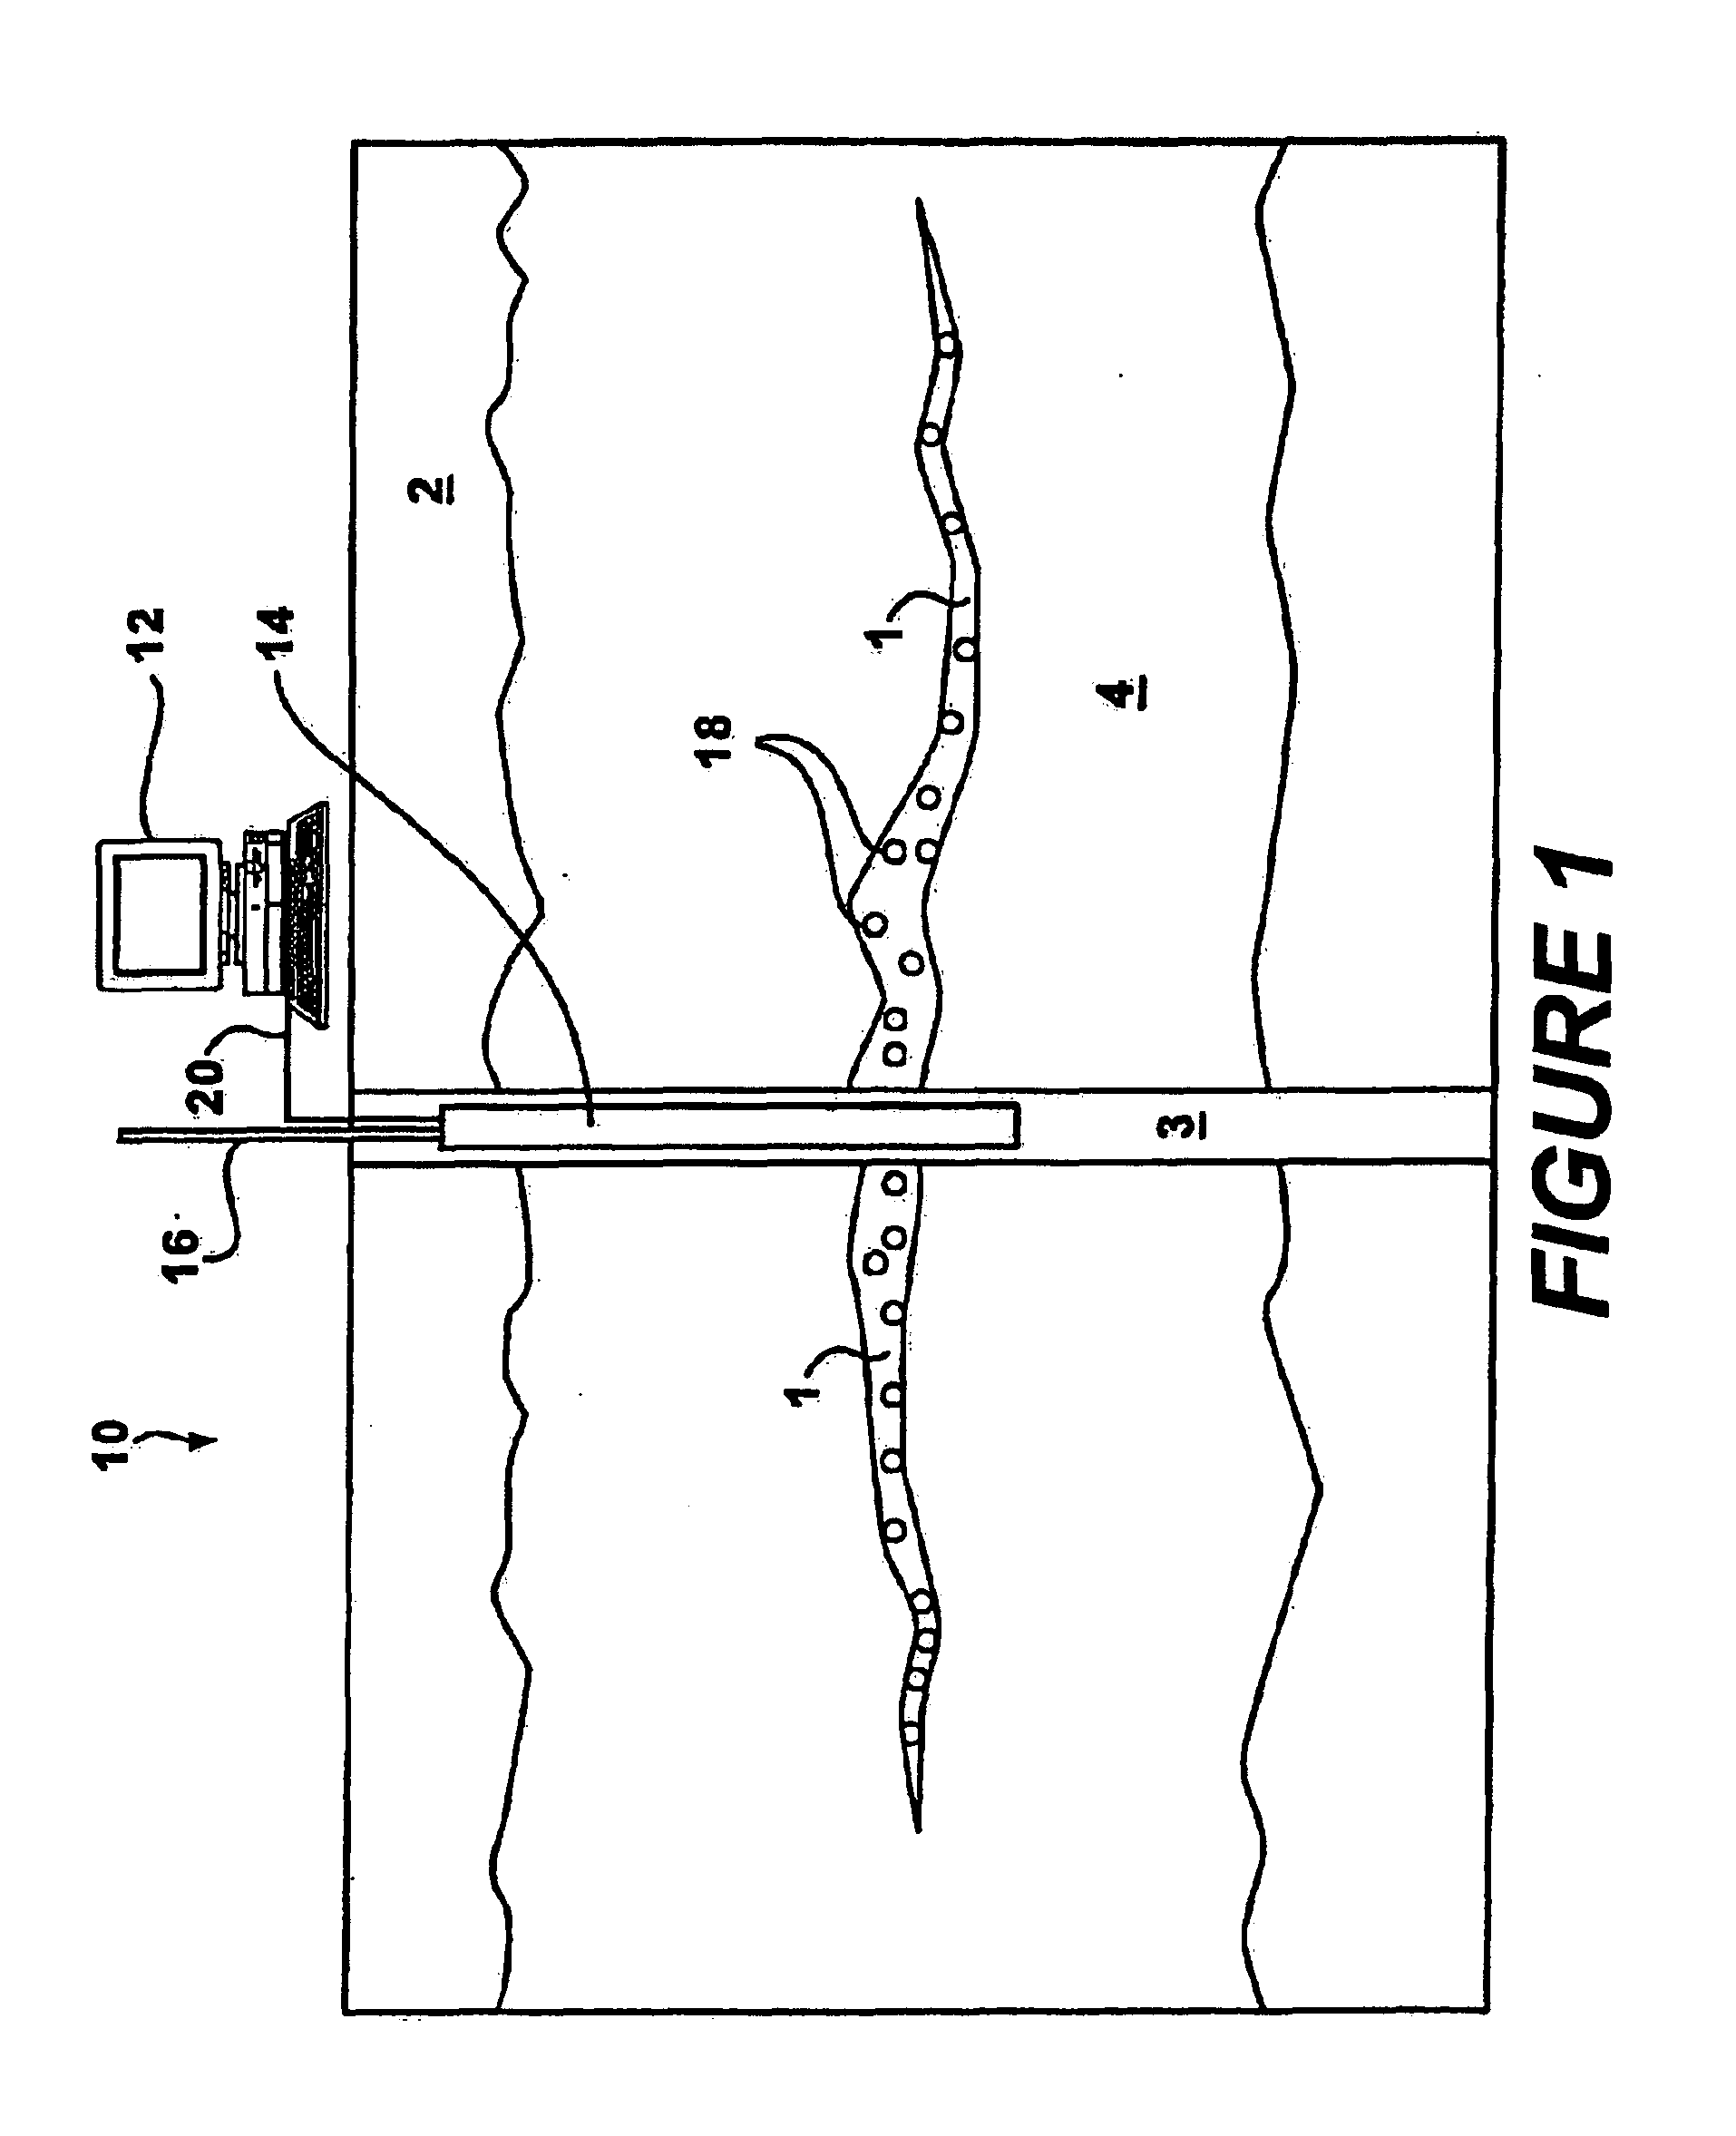 Method and system for determining parameters inside a subterranean formation using data sensors and a wireless ad hoc network